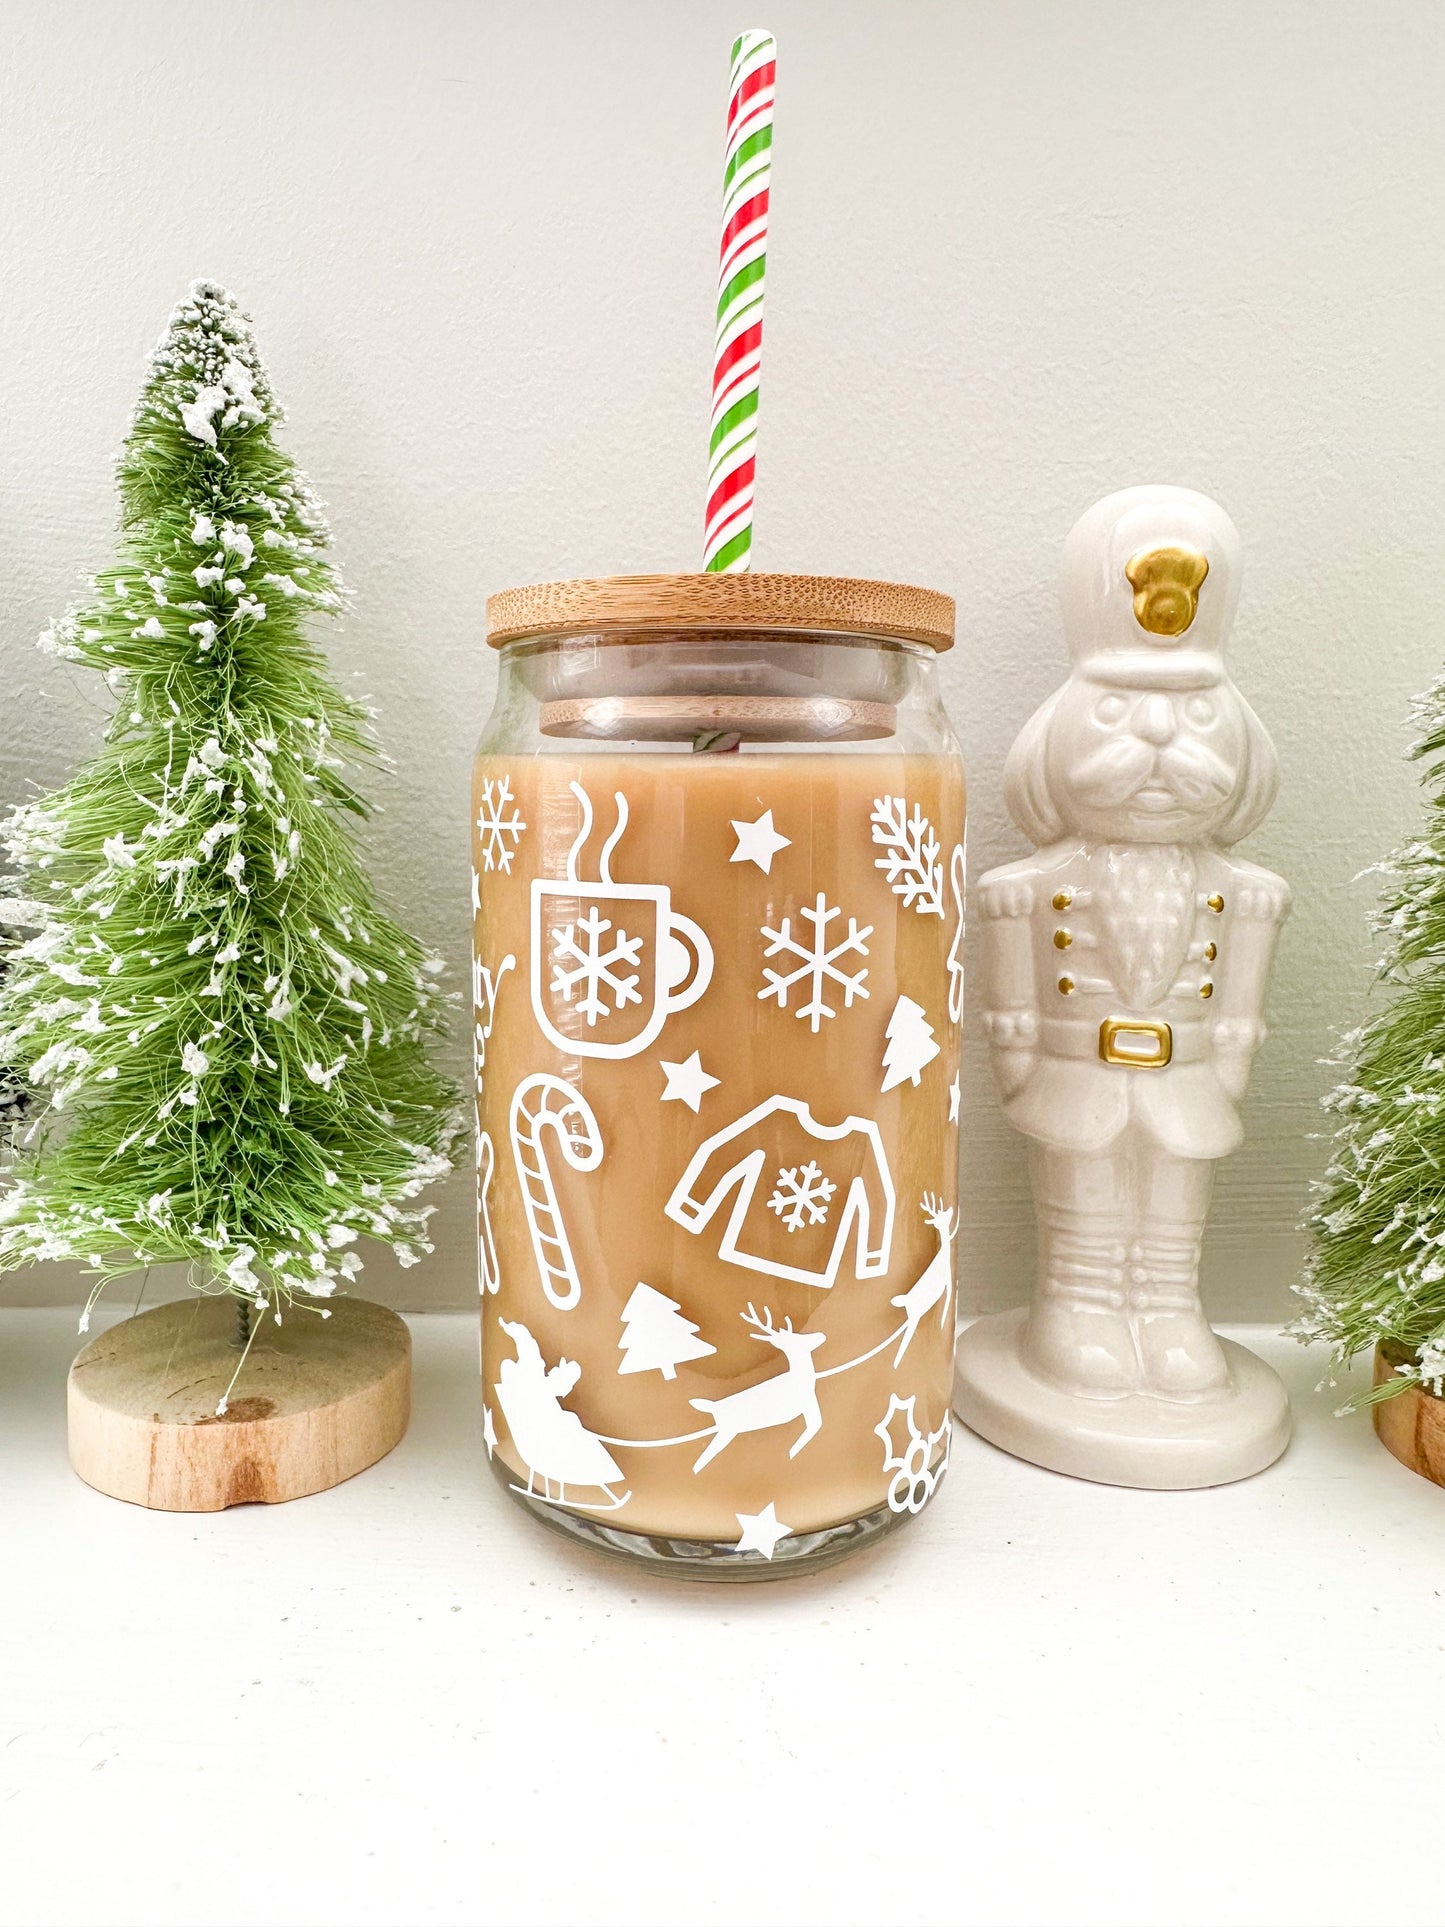 Glass Iced Coffee 12 oz tumbler, Christmas gift, holiday gift, iced coffee,  gift for her, handmade personalized with vinyl